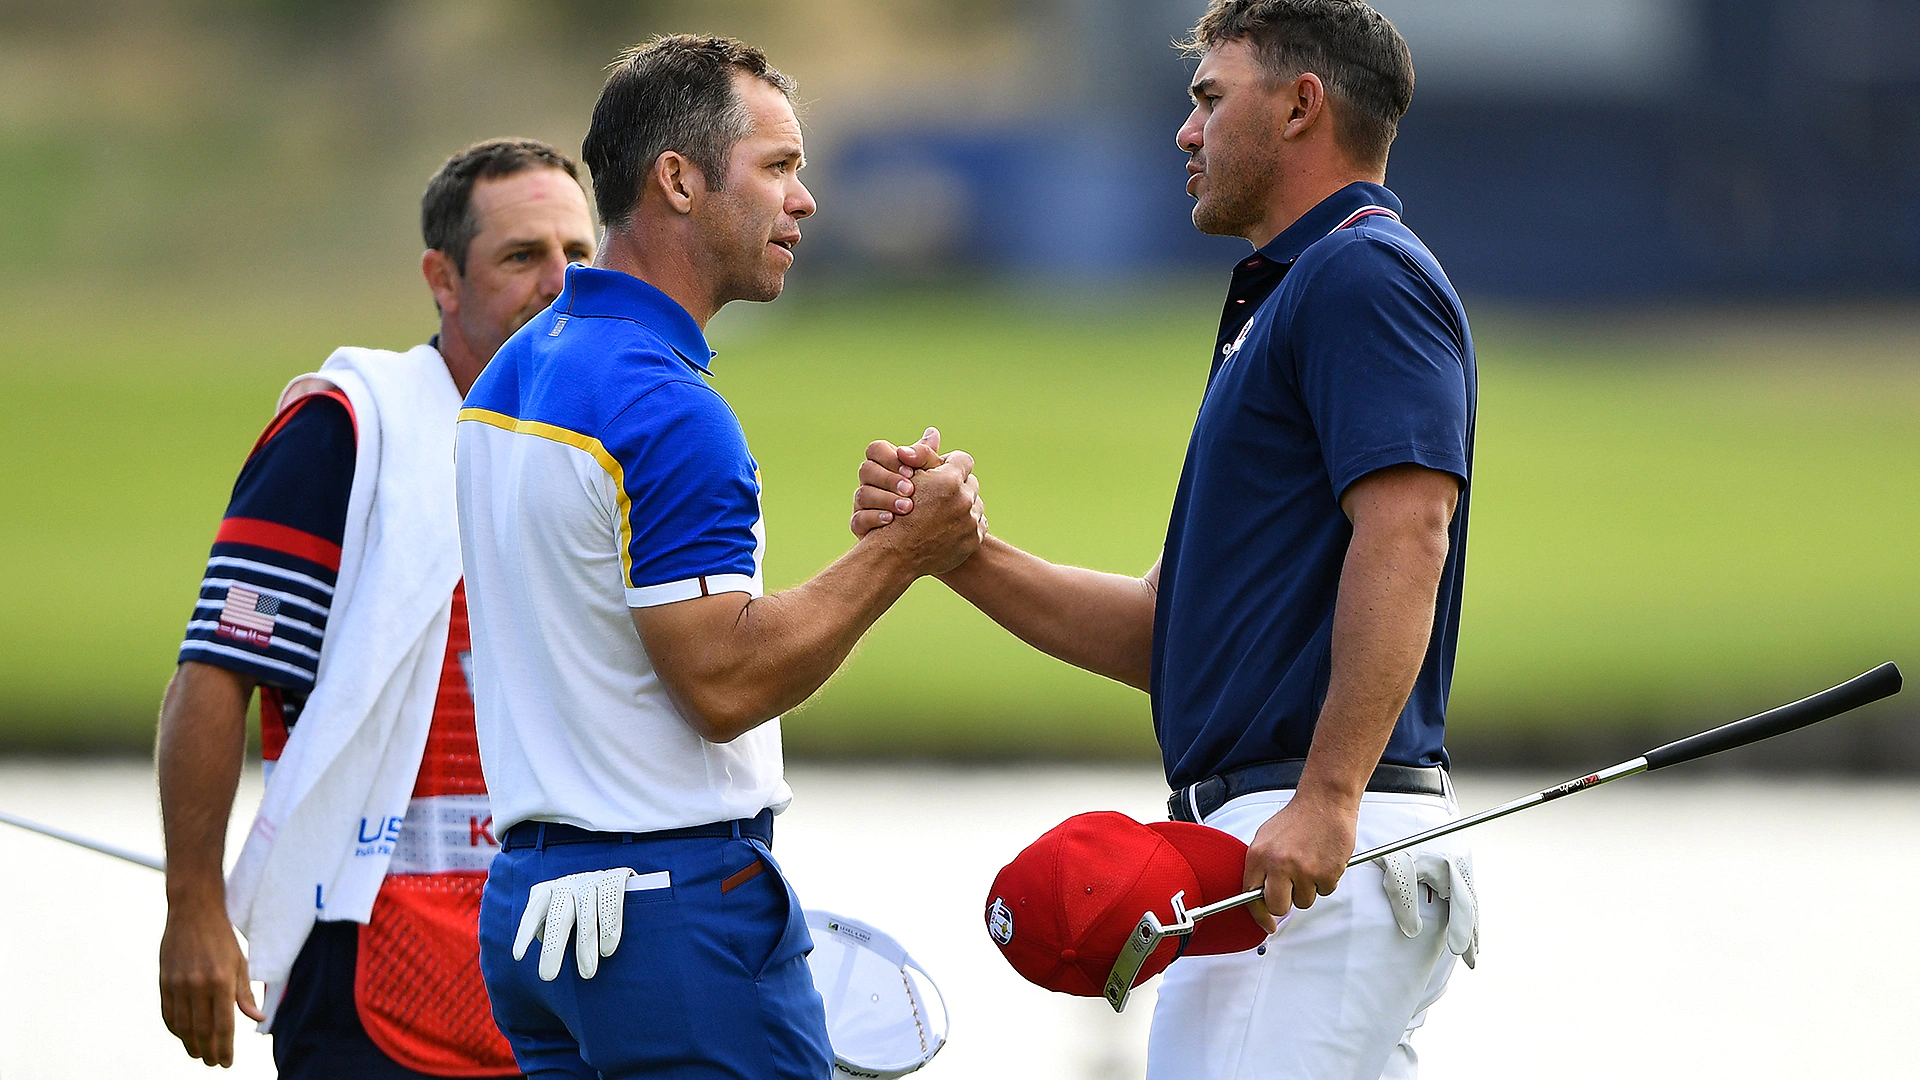 European, U.S. individual Ryder Cup records